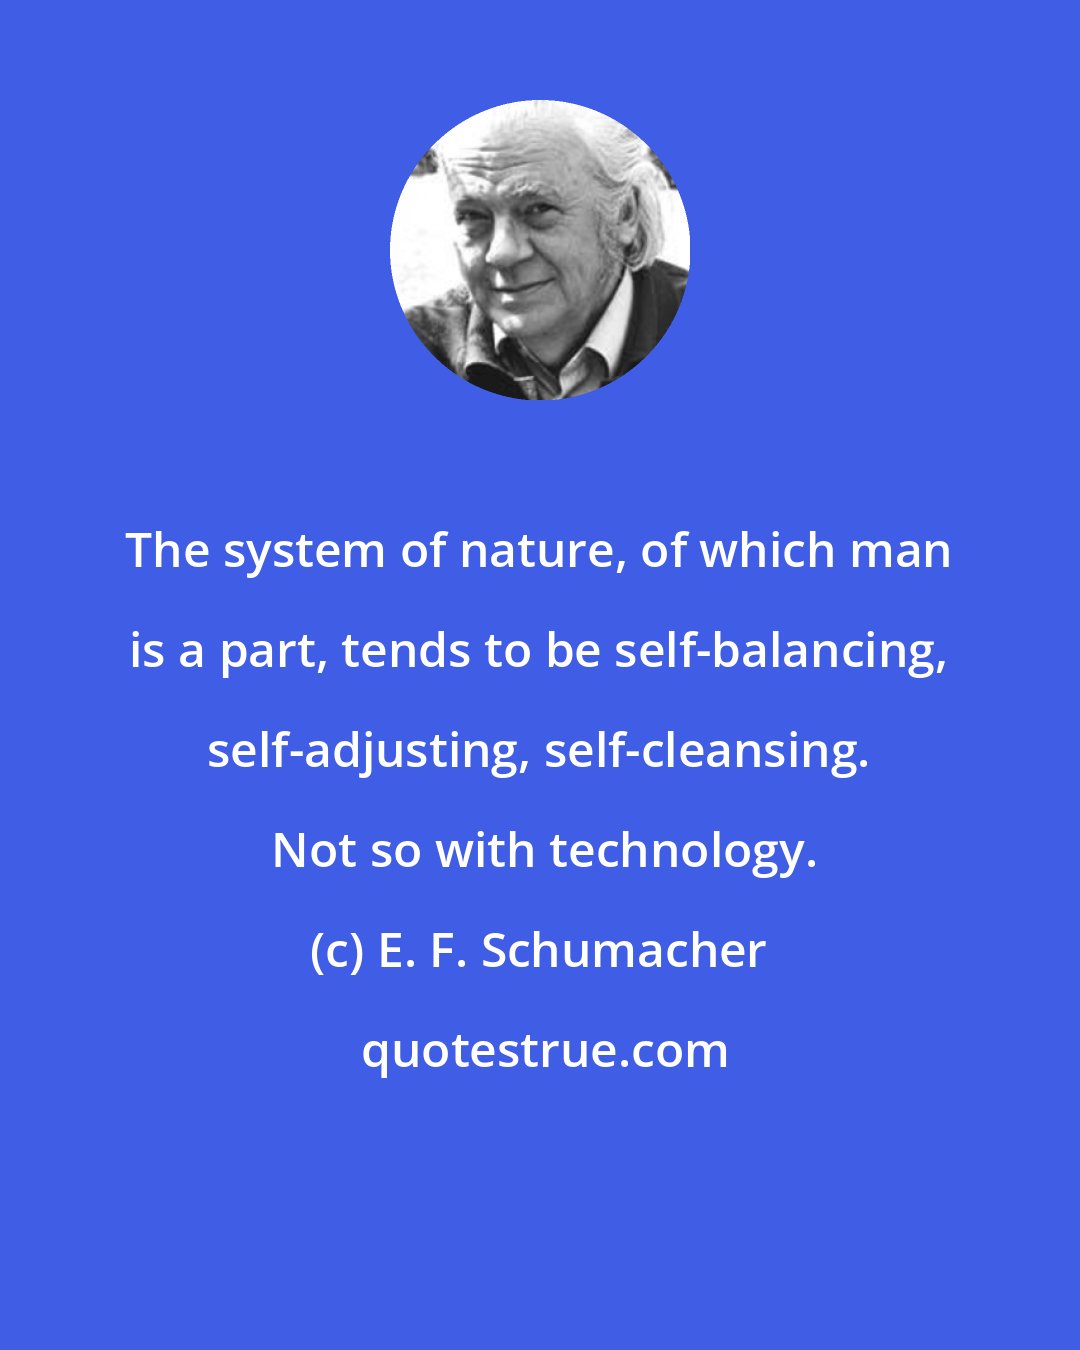 E. F. Schumacher: The system of nature, of which man is a part, tends to be self-balancing, self-adjusting, self-cleansing.  Not so with technology.